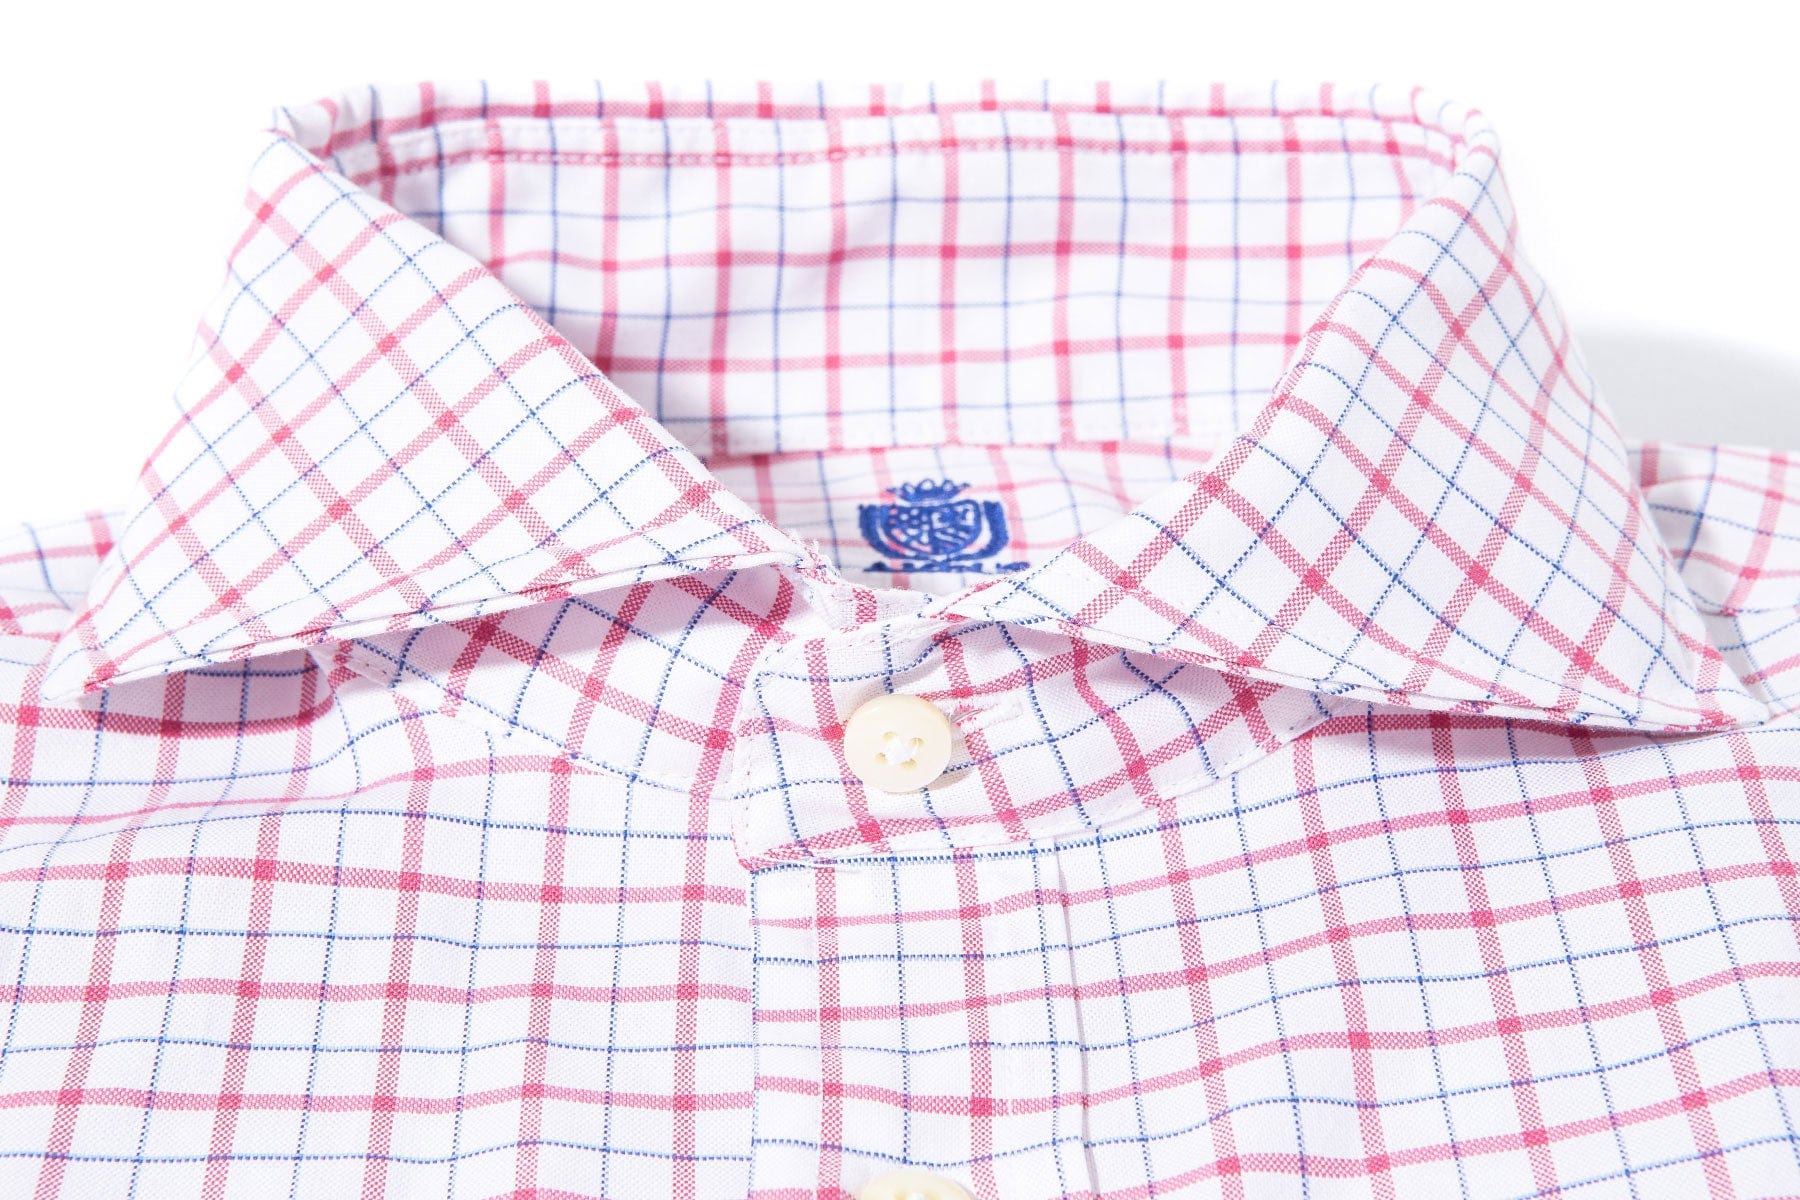 Panamera Cotton Check Shirt In Blue W Red - AXEL'S